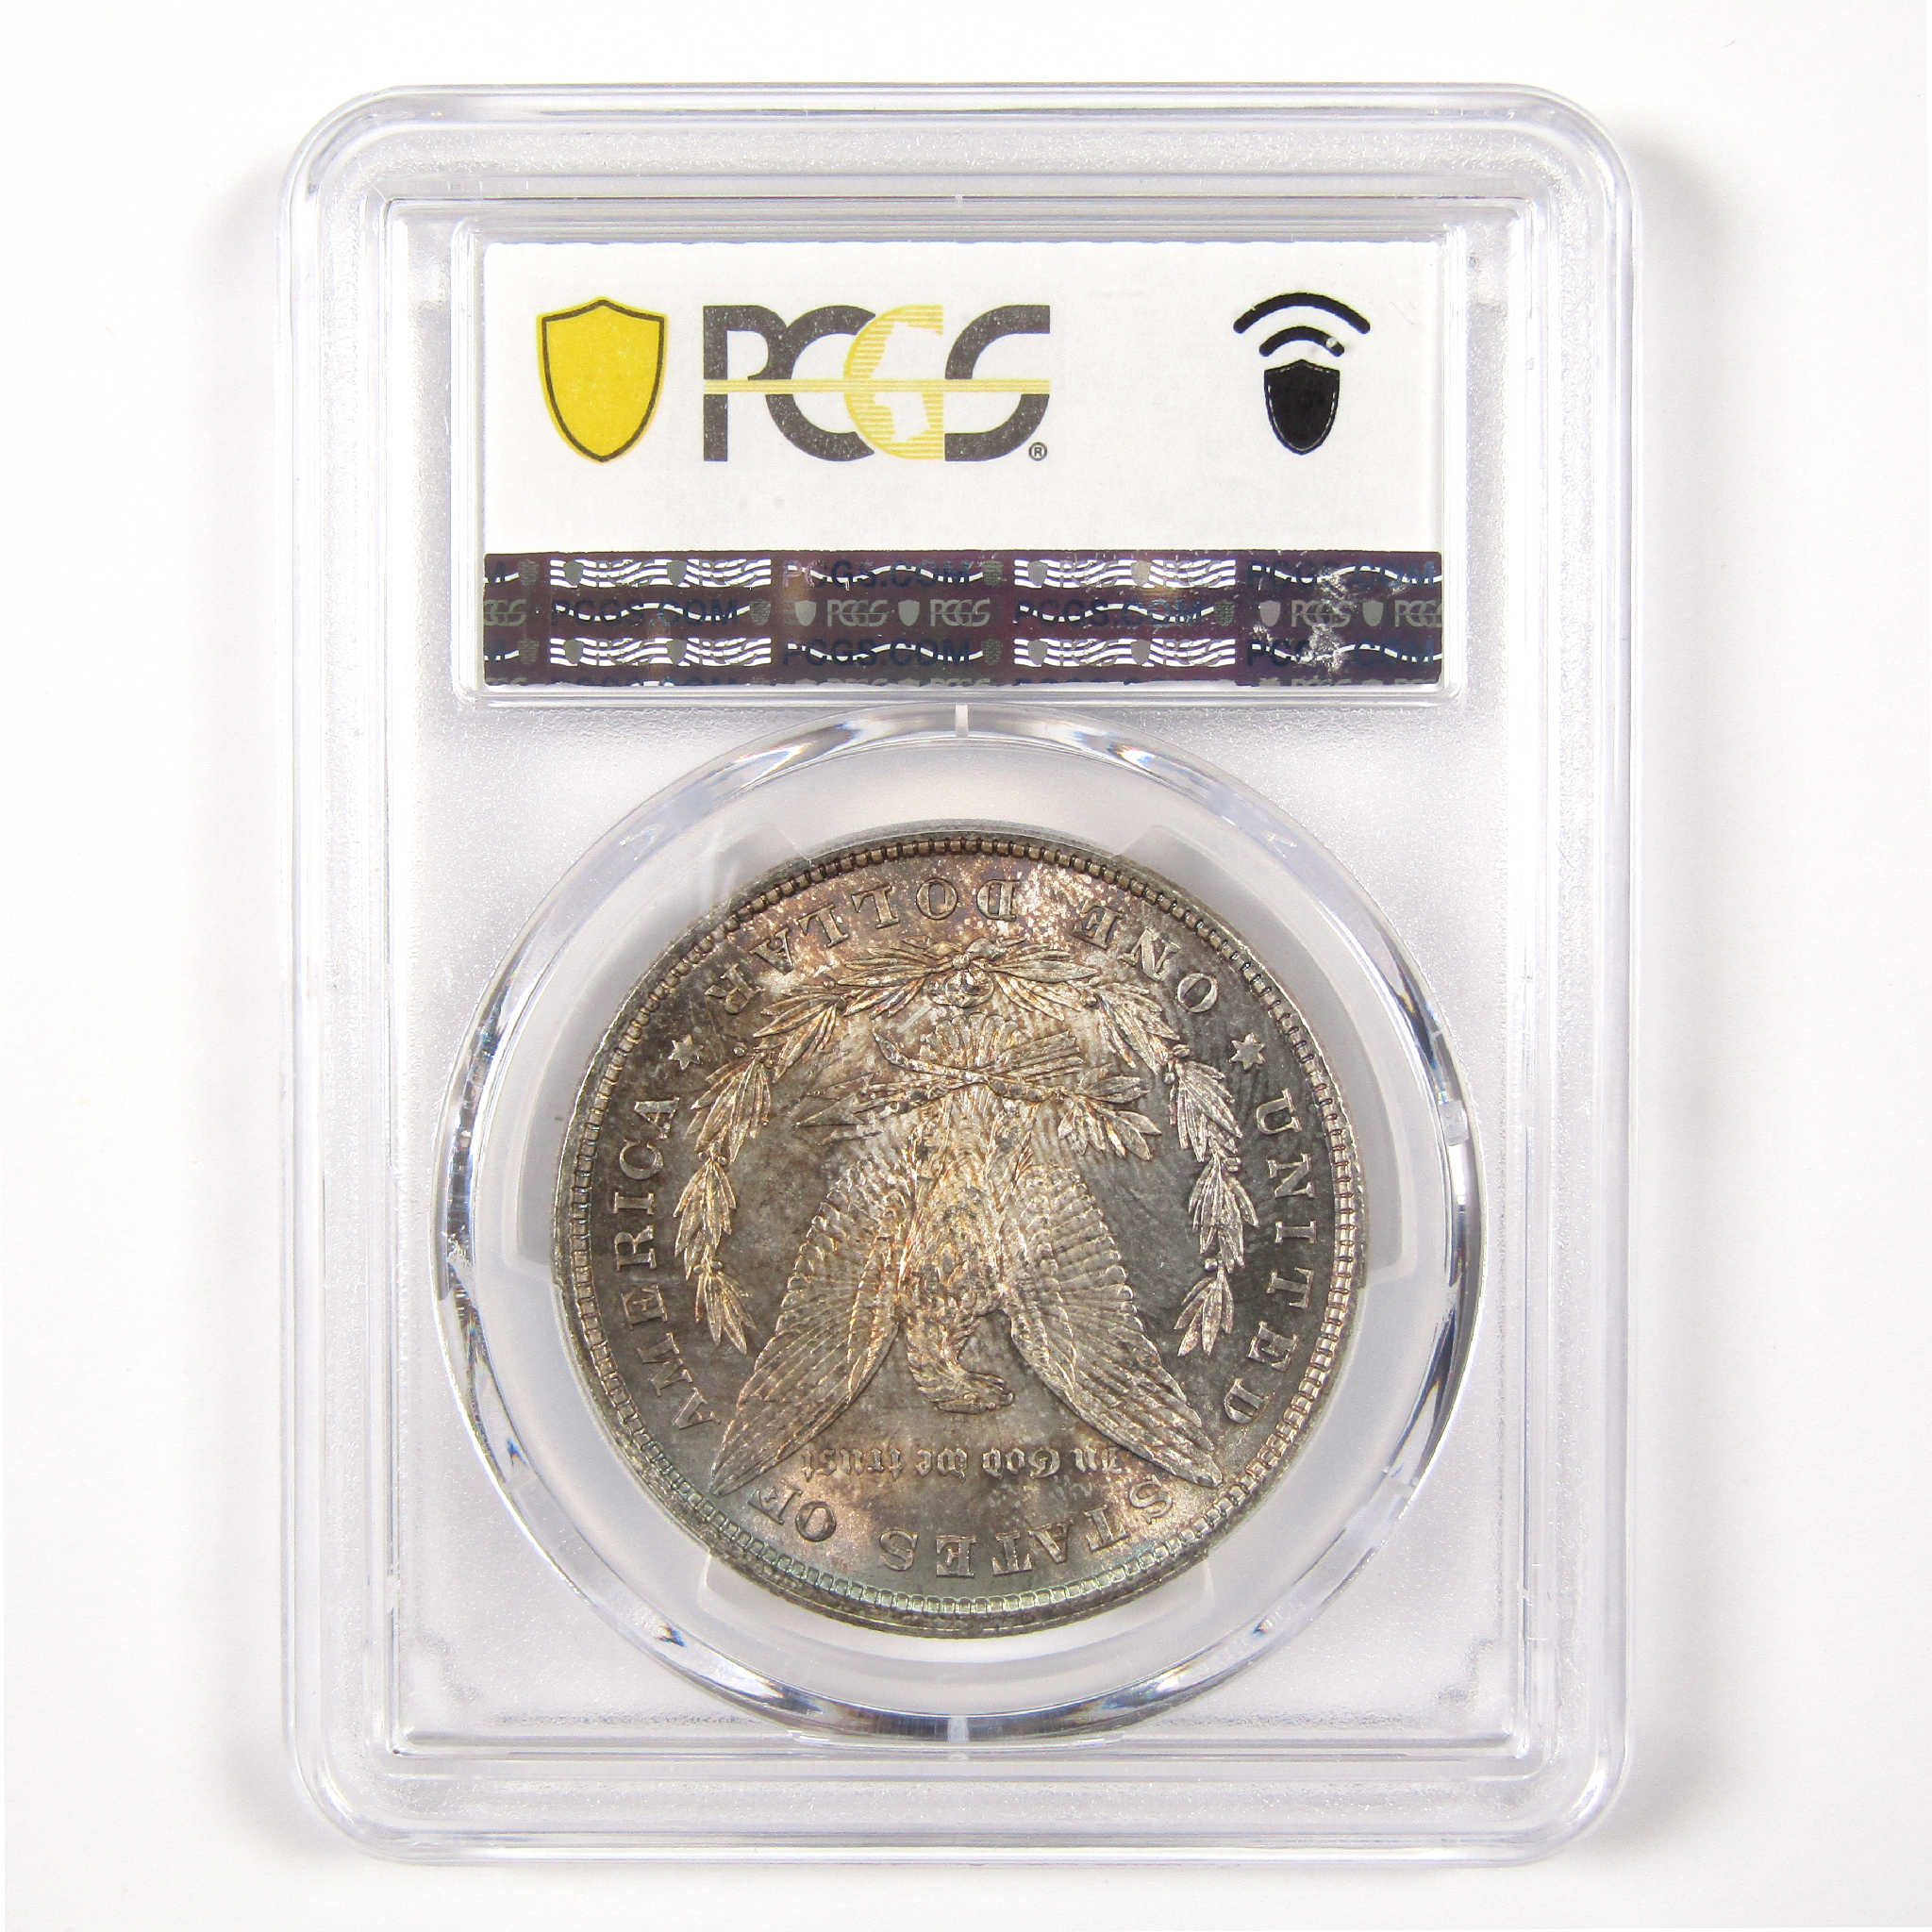 1878 8TF Morgan $1 MS 62 PCGS Silver Rev Finger Print SKU:I11341 - Morgan coin - Morgan silver dollar - Morgan silver dollar for sale - Profile Coins &amp; Collectibles